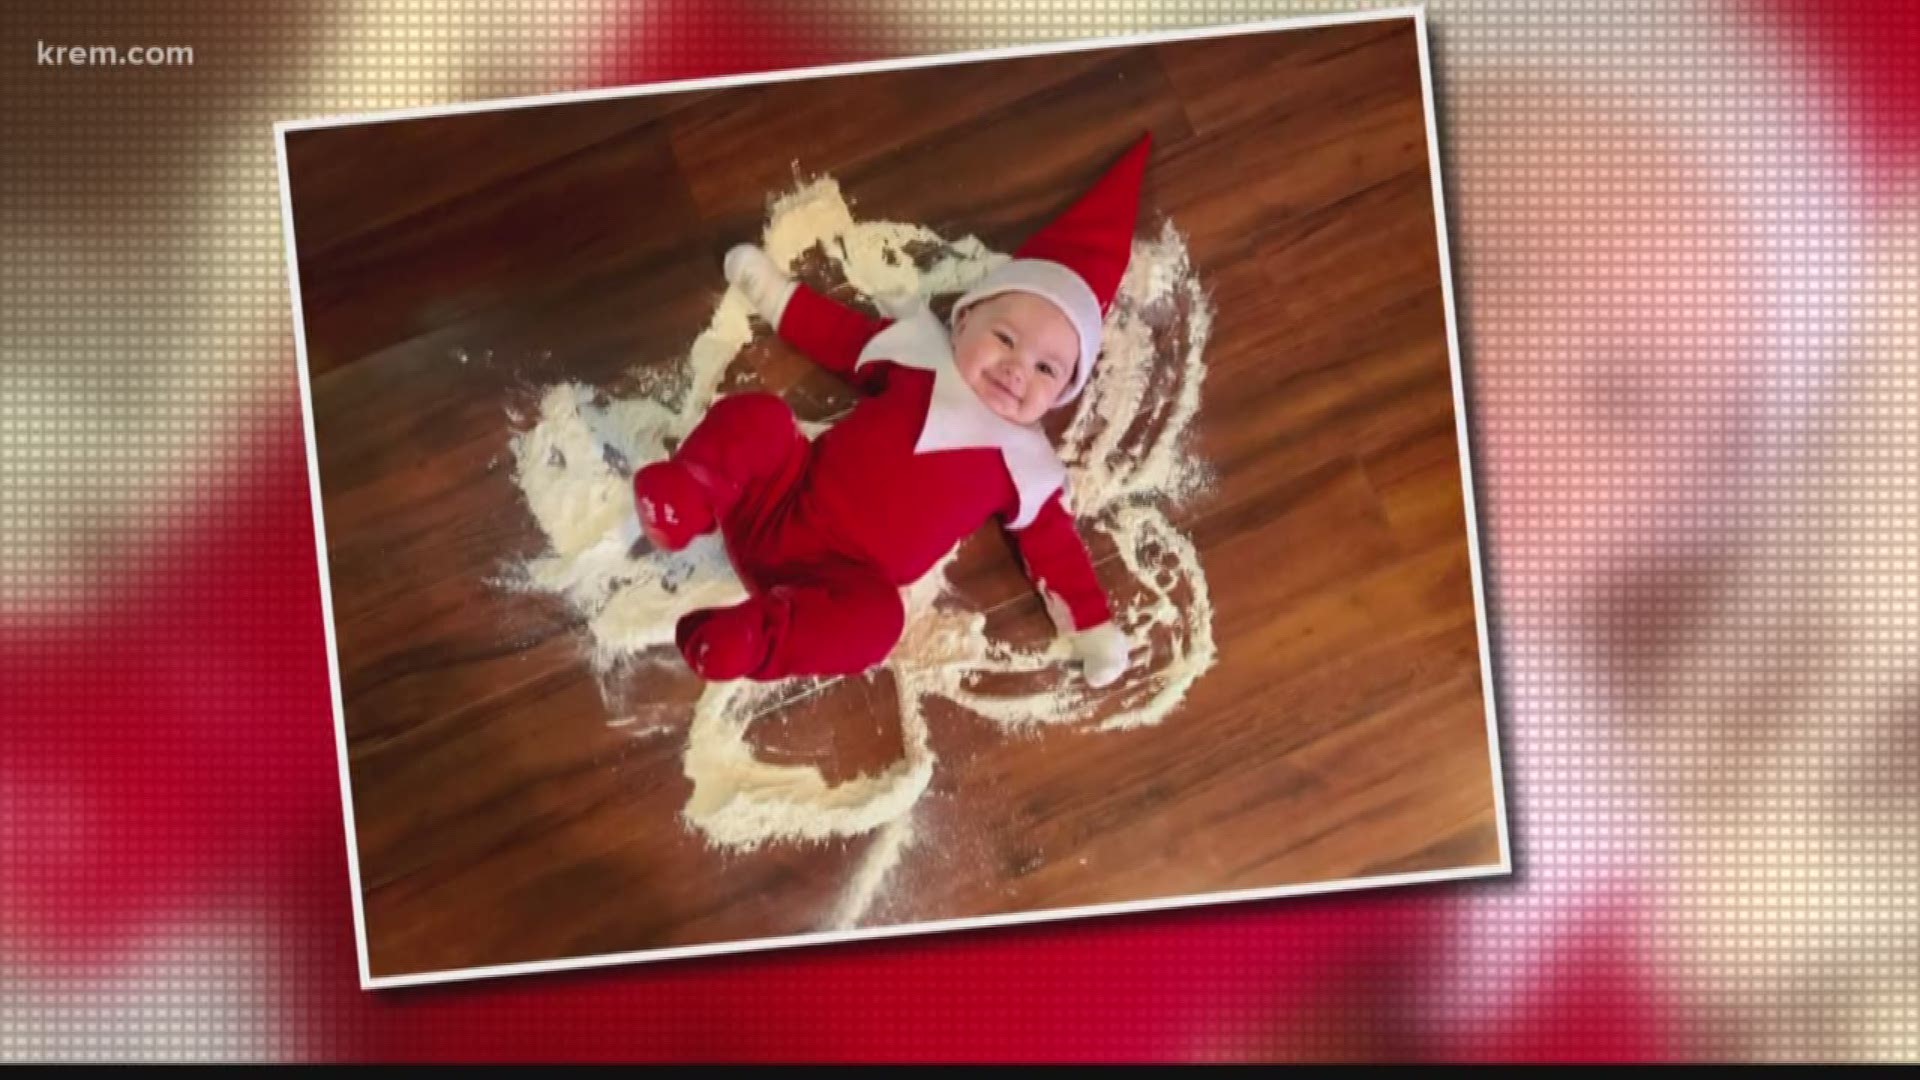 Couple turns 6-month-old son into real life Elf on the Shelf